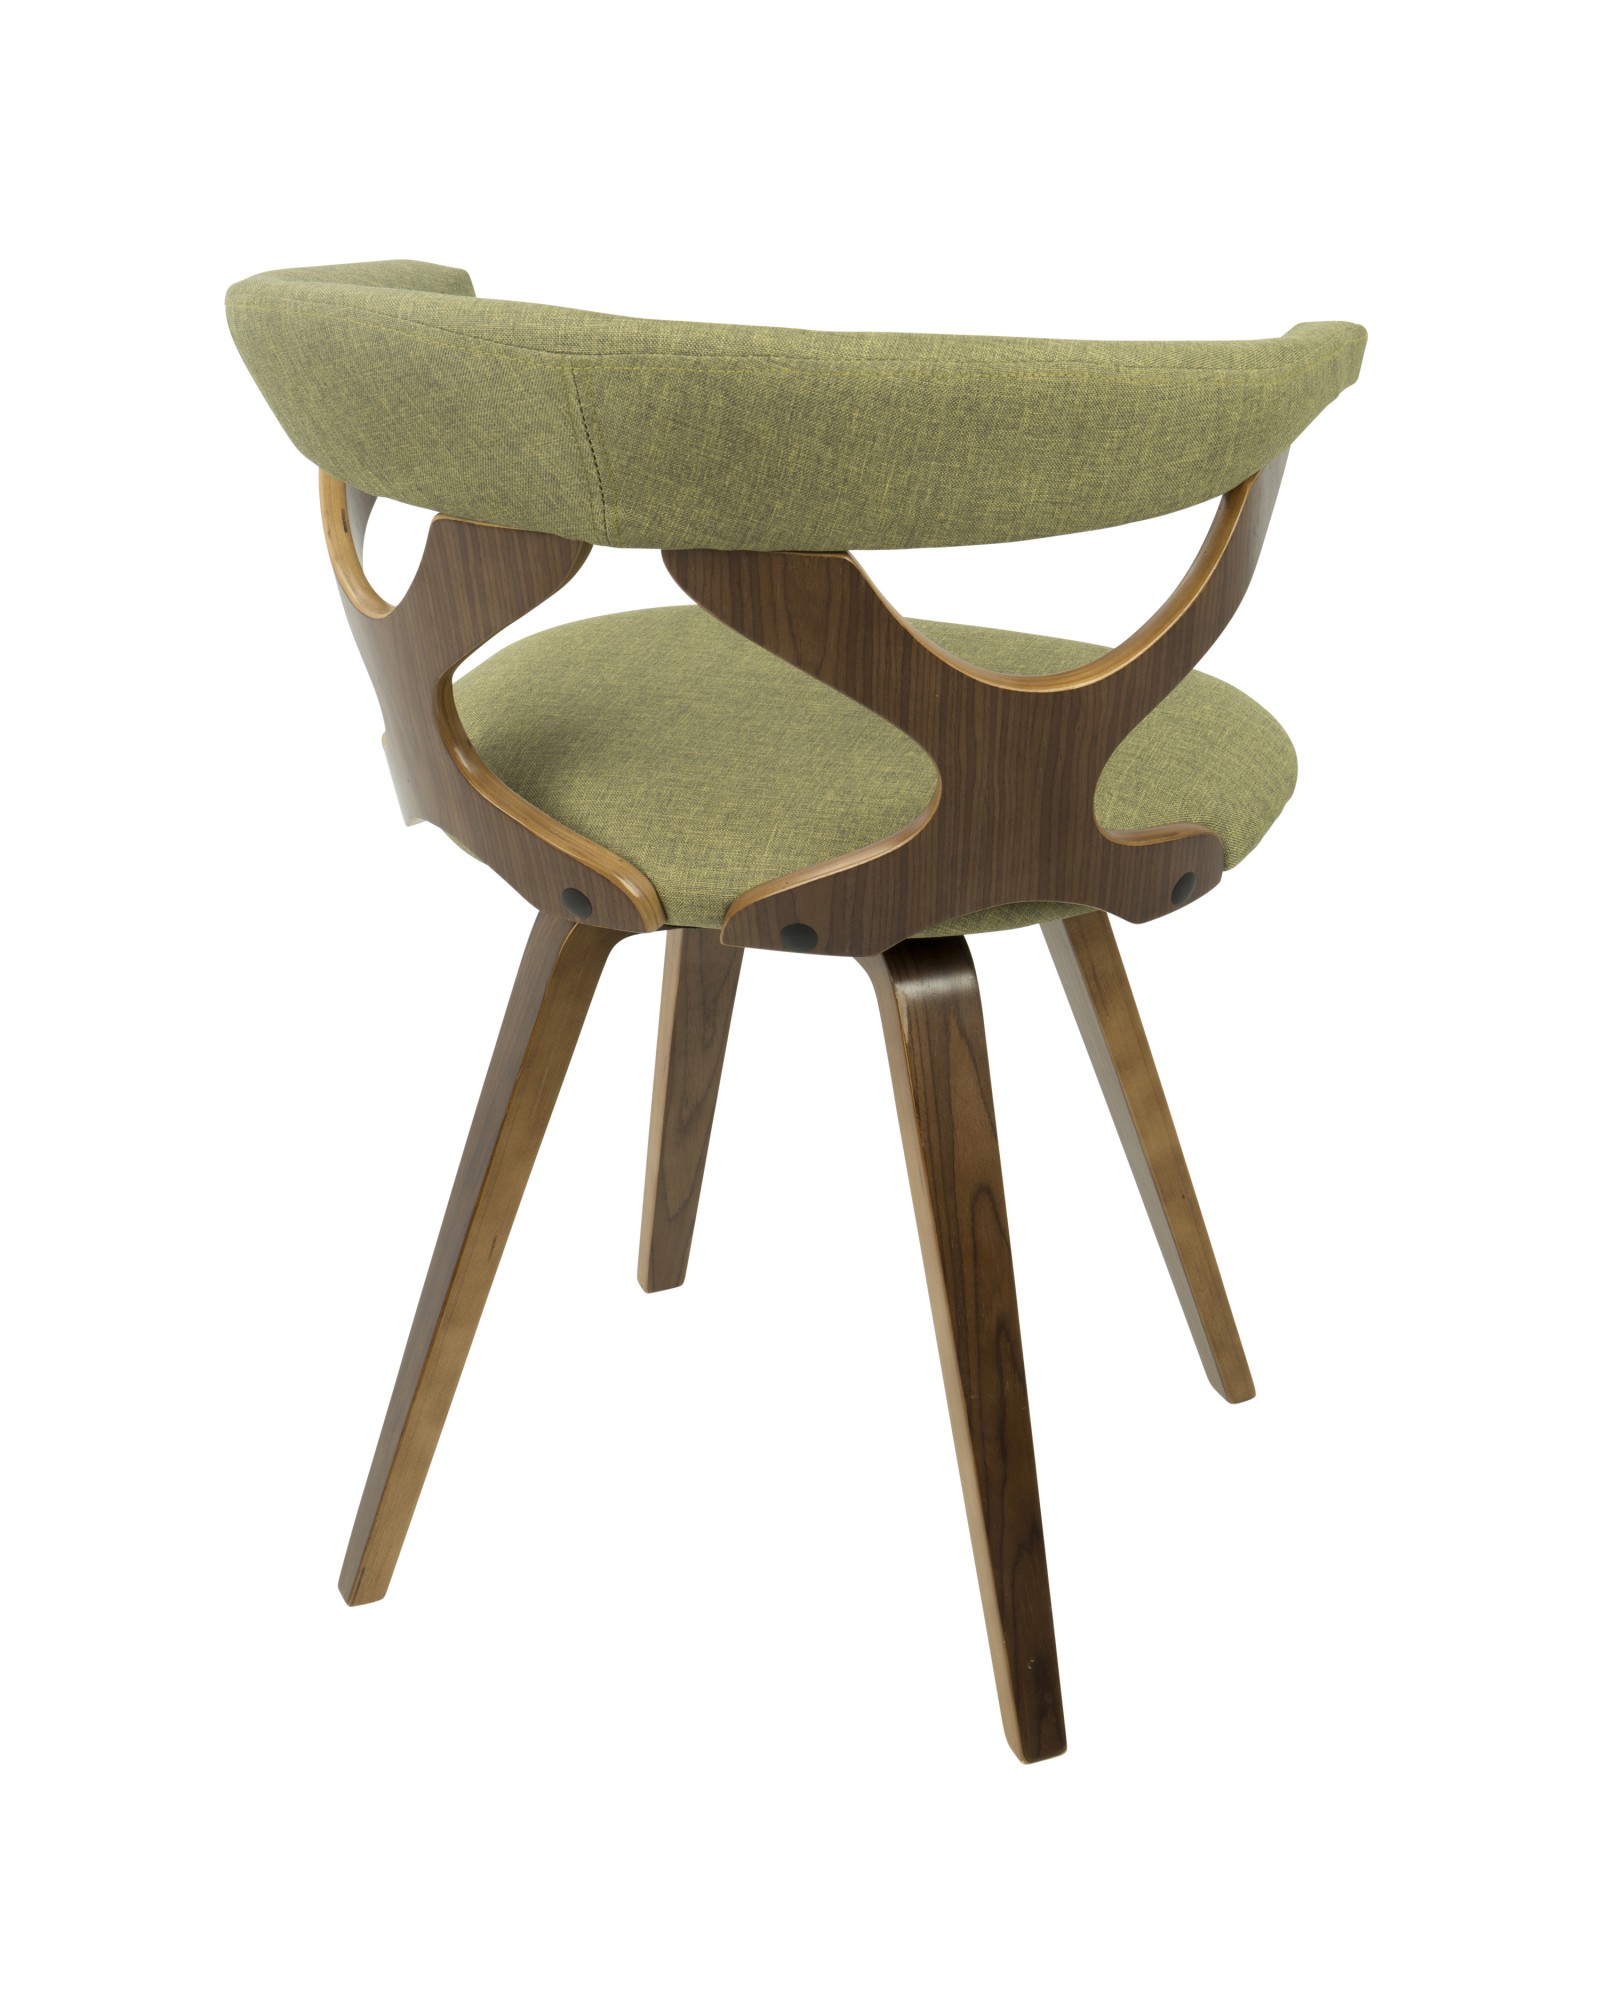 Gardenia Mid-Century Modern Dining/Accent Chair with Swivel in Walnut Wood and Green Fabric